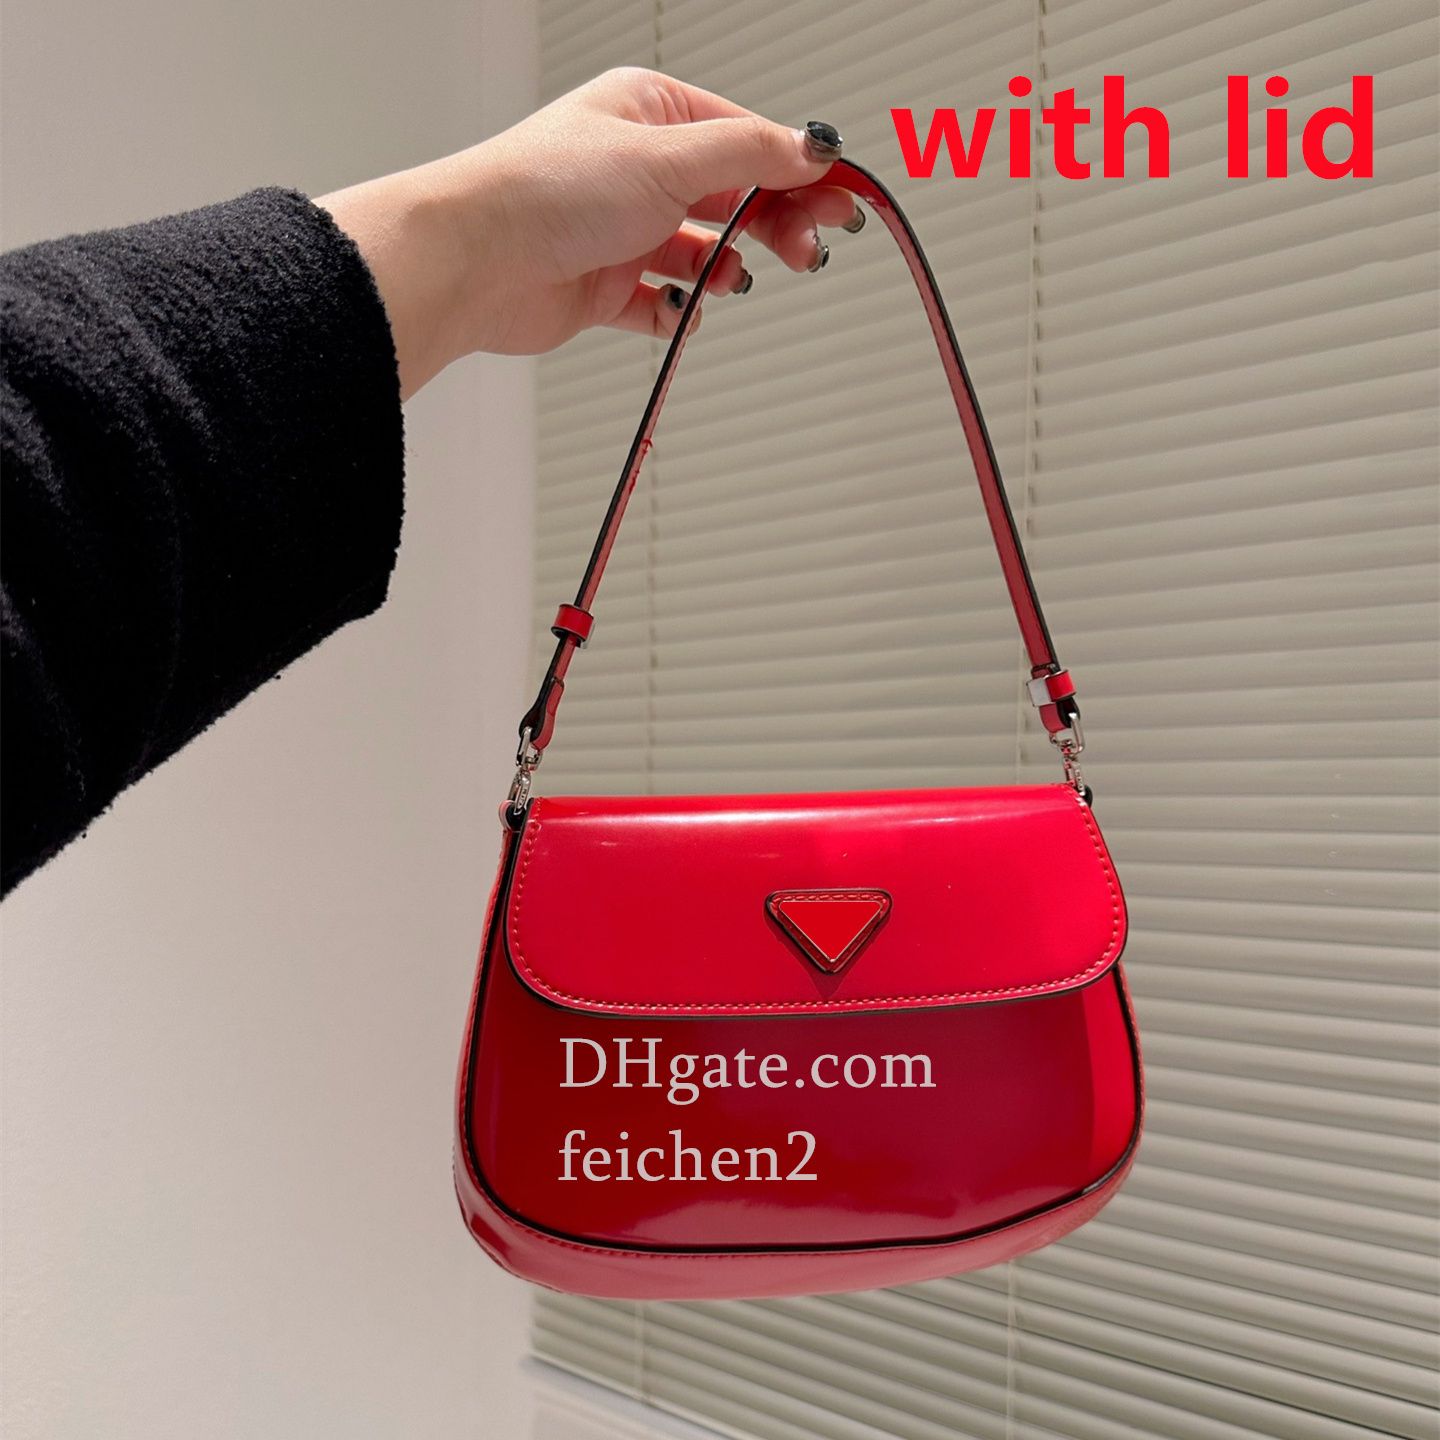 With lid-red